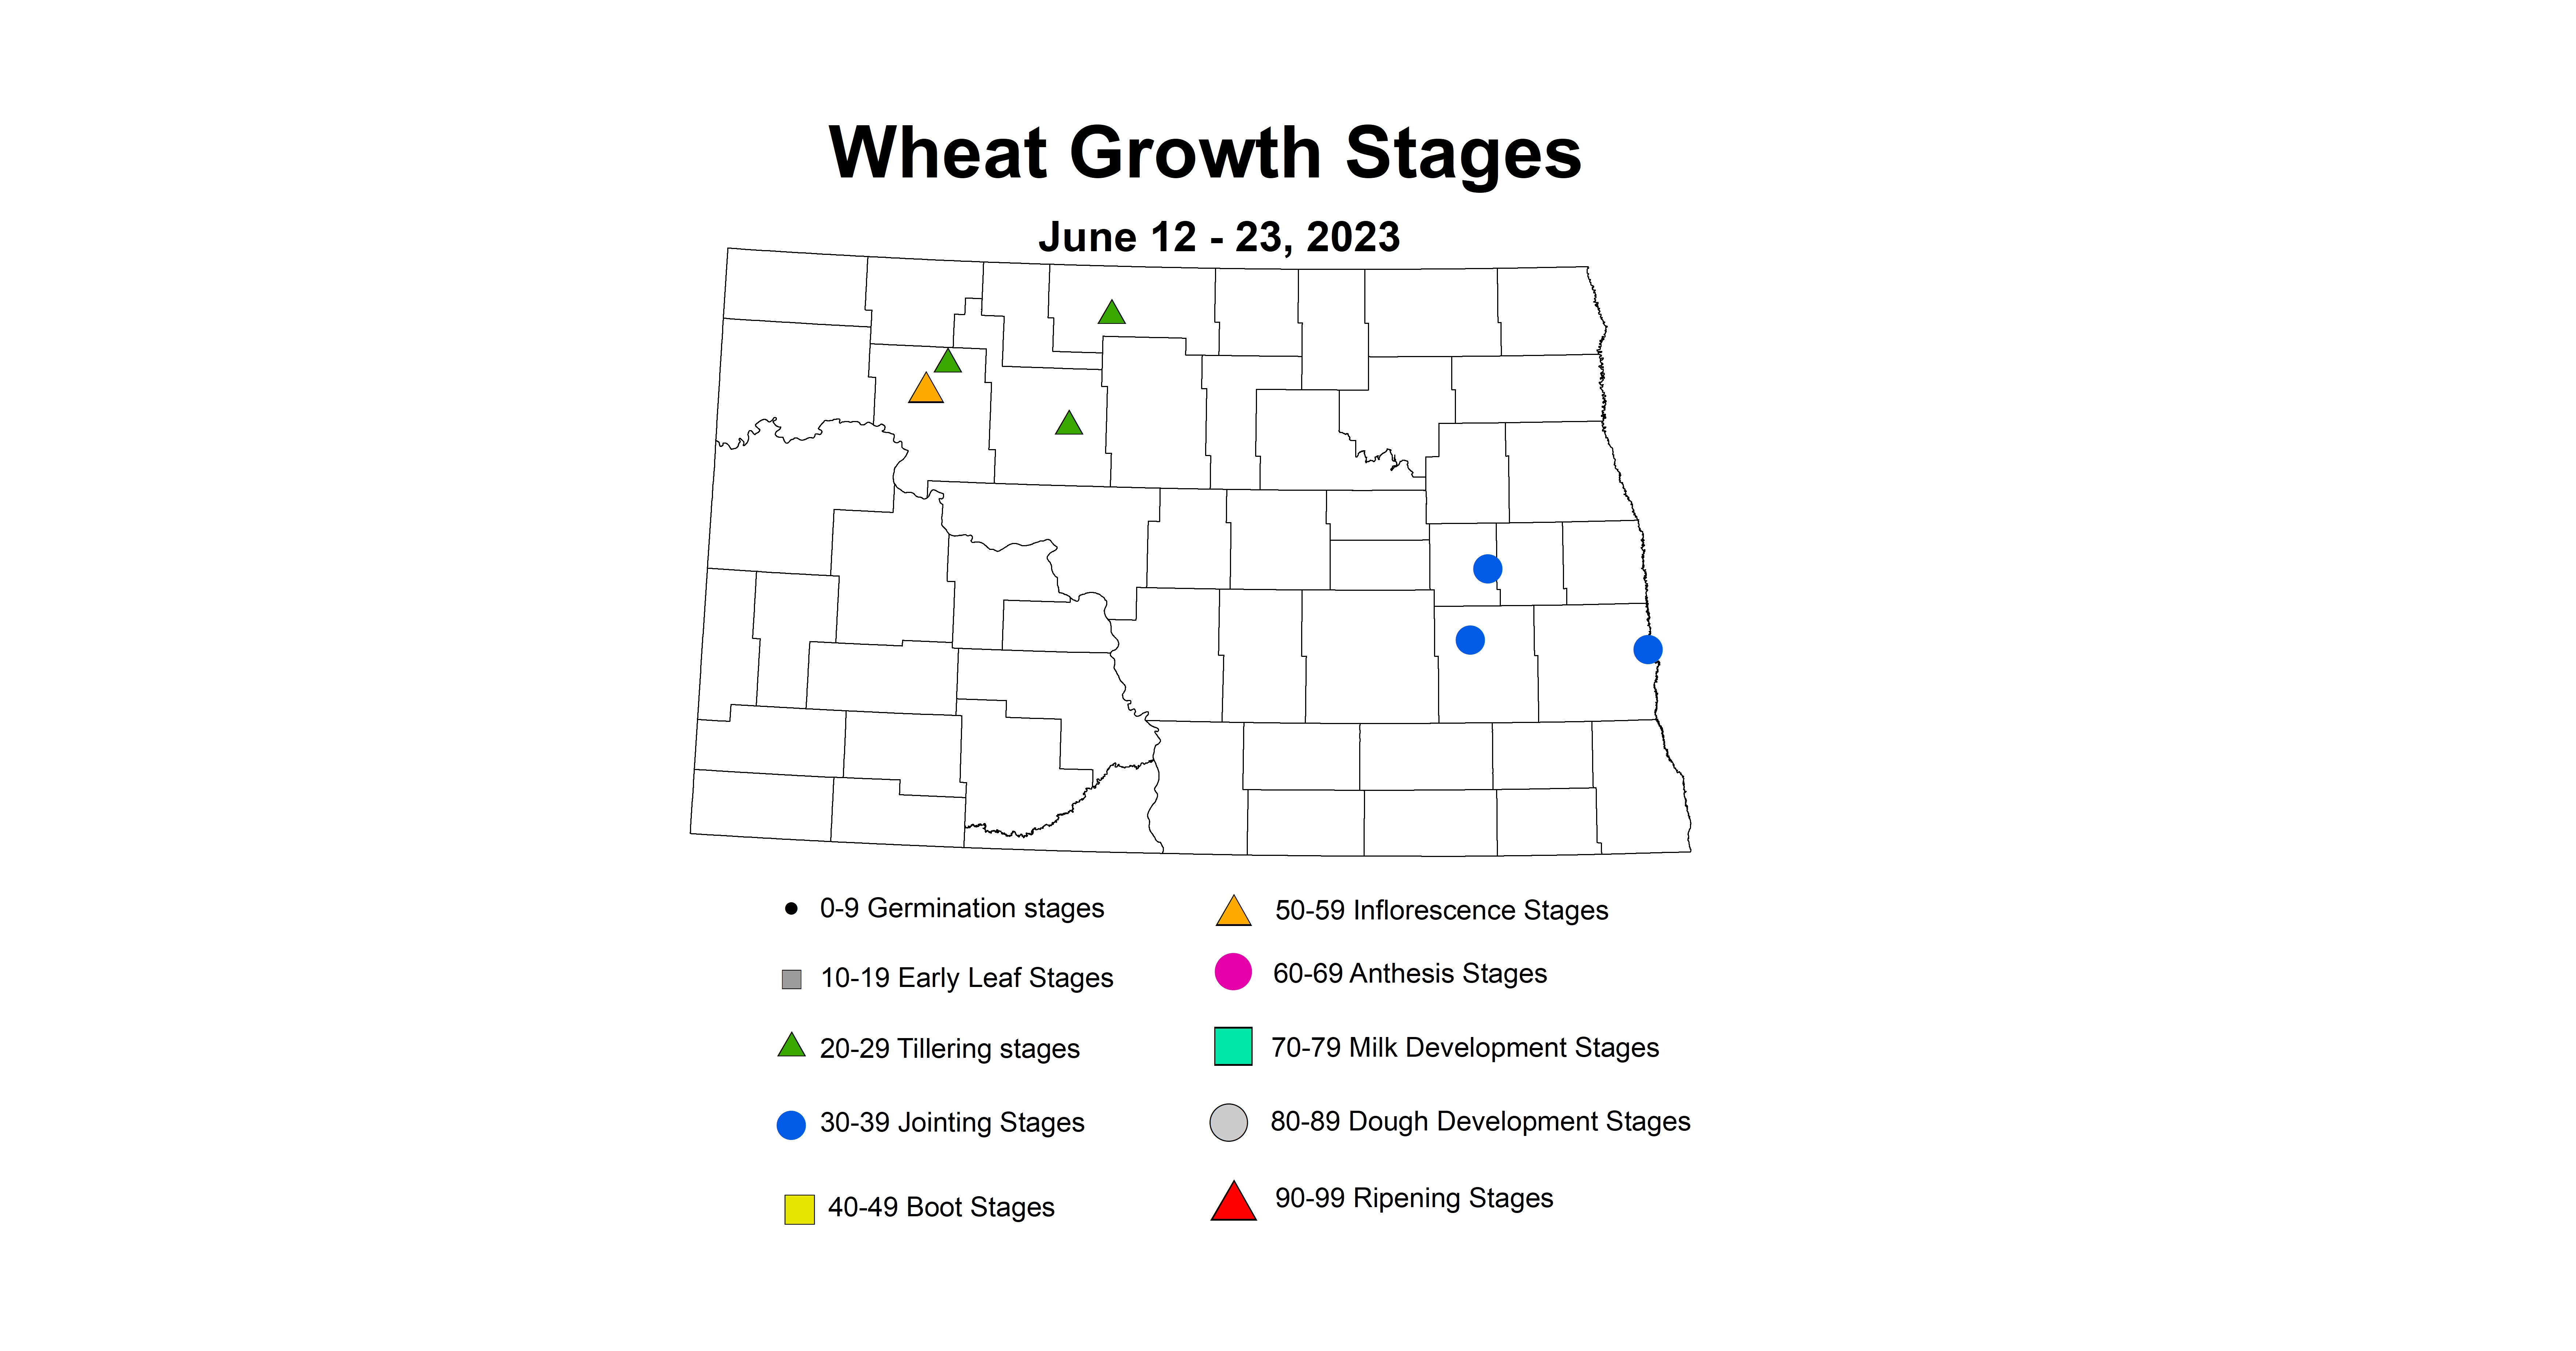 wheat insect trap growth stages June 12-23 2023